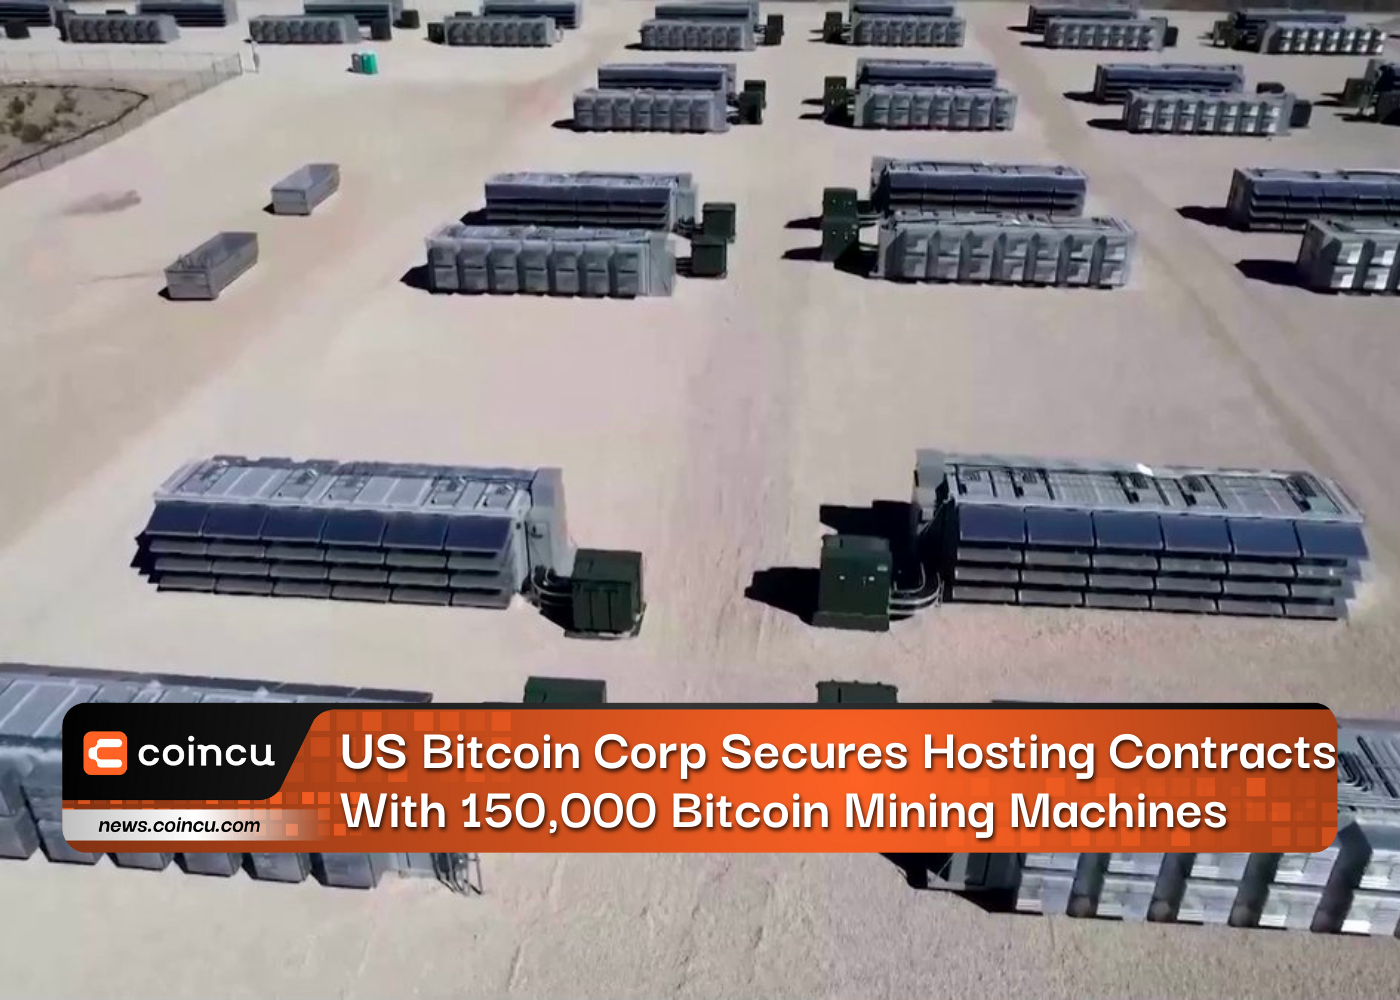 US Bitcoin Corp Secures Hosting Contracts With 150,000 Bitcoin Mining Machines